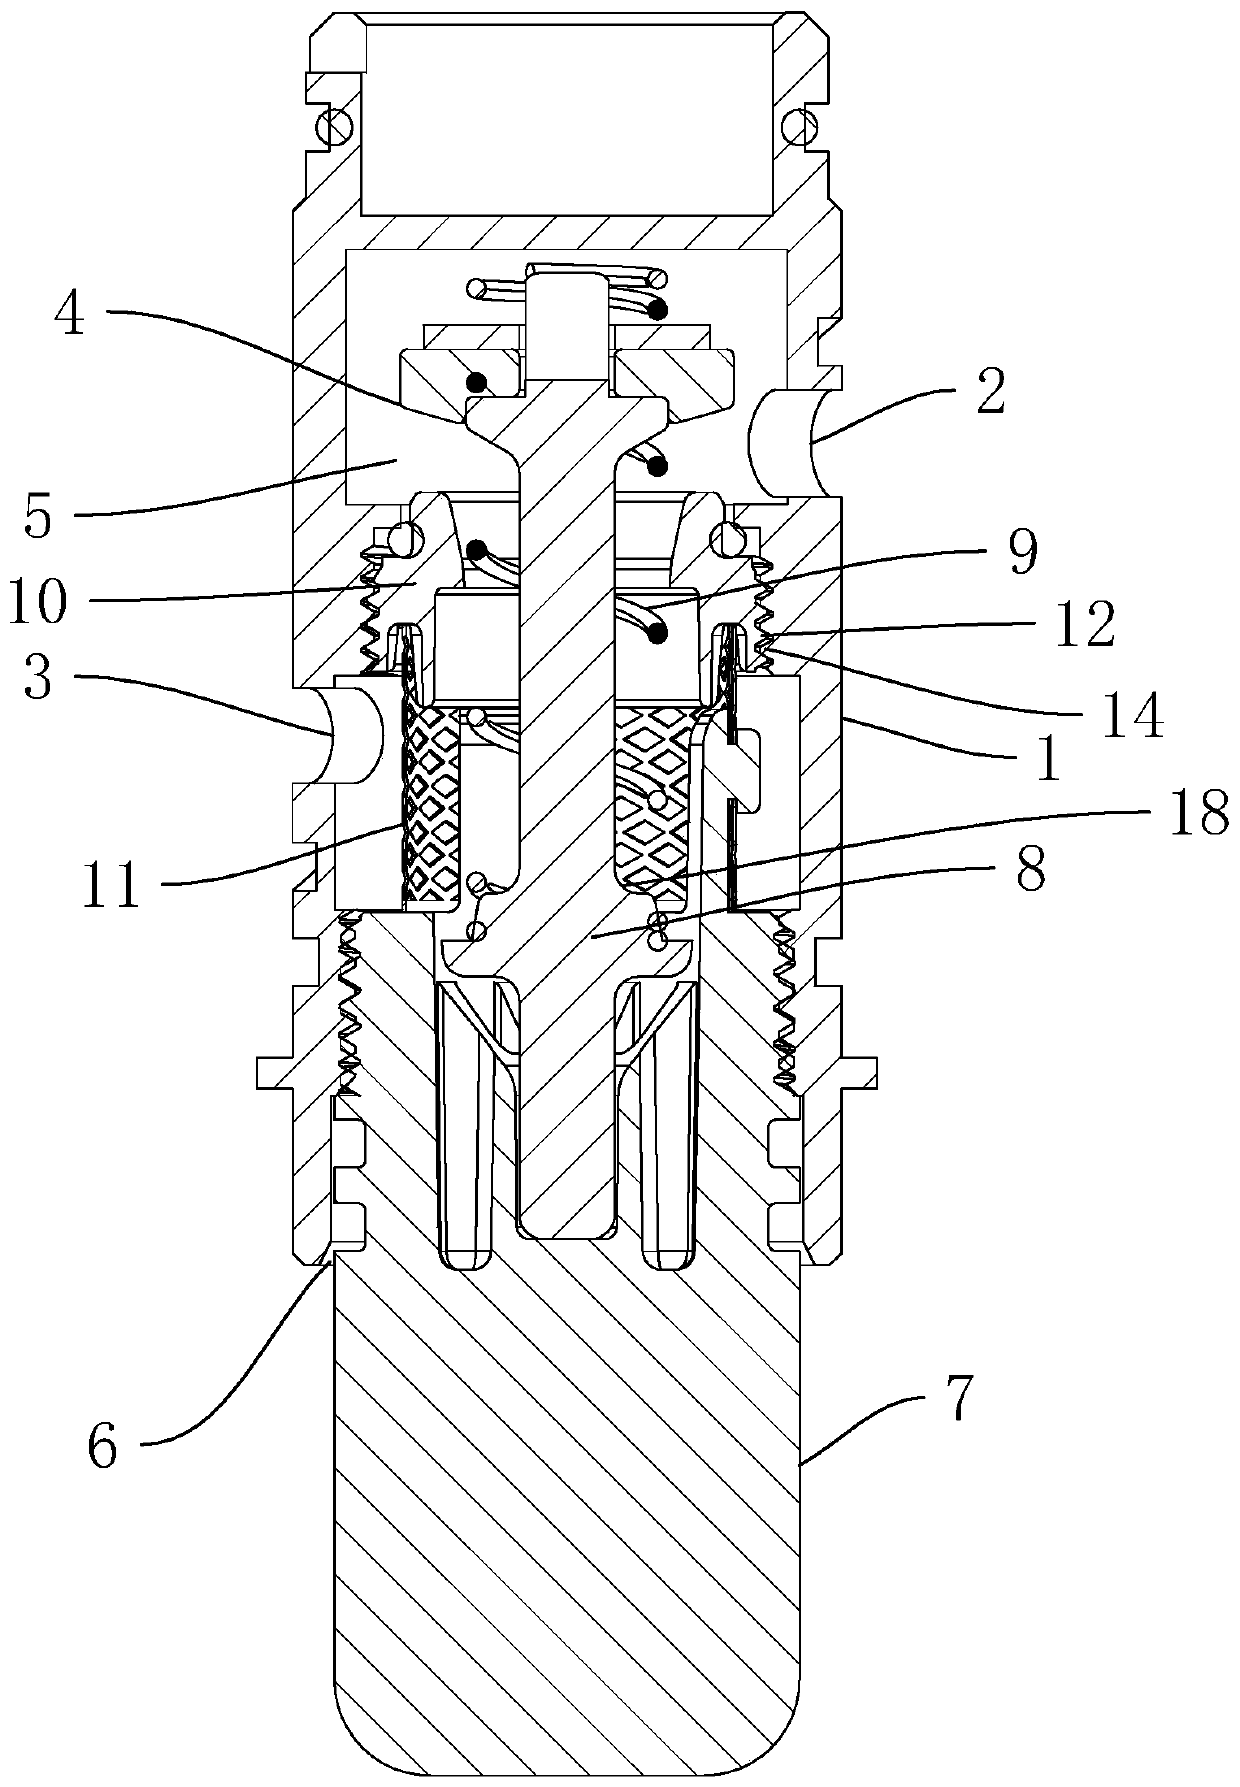 Valve element and water mixing valve applying same